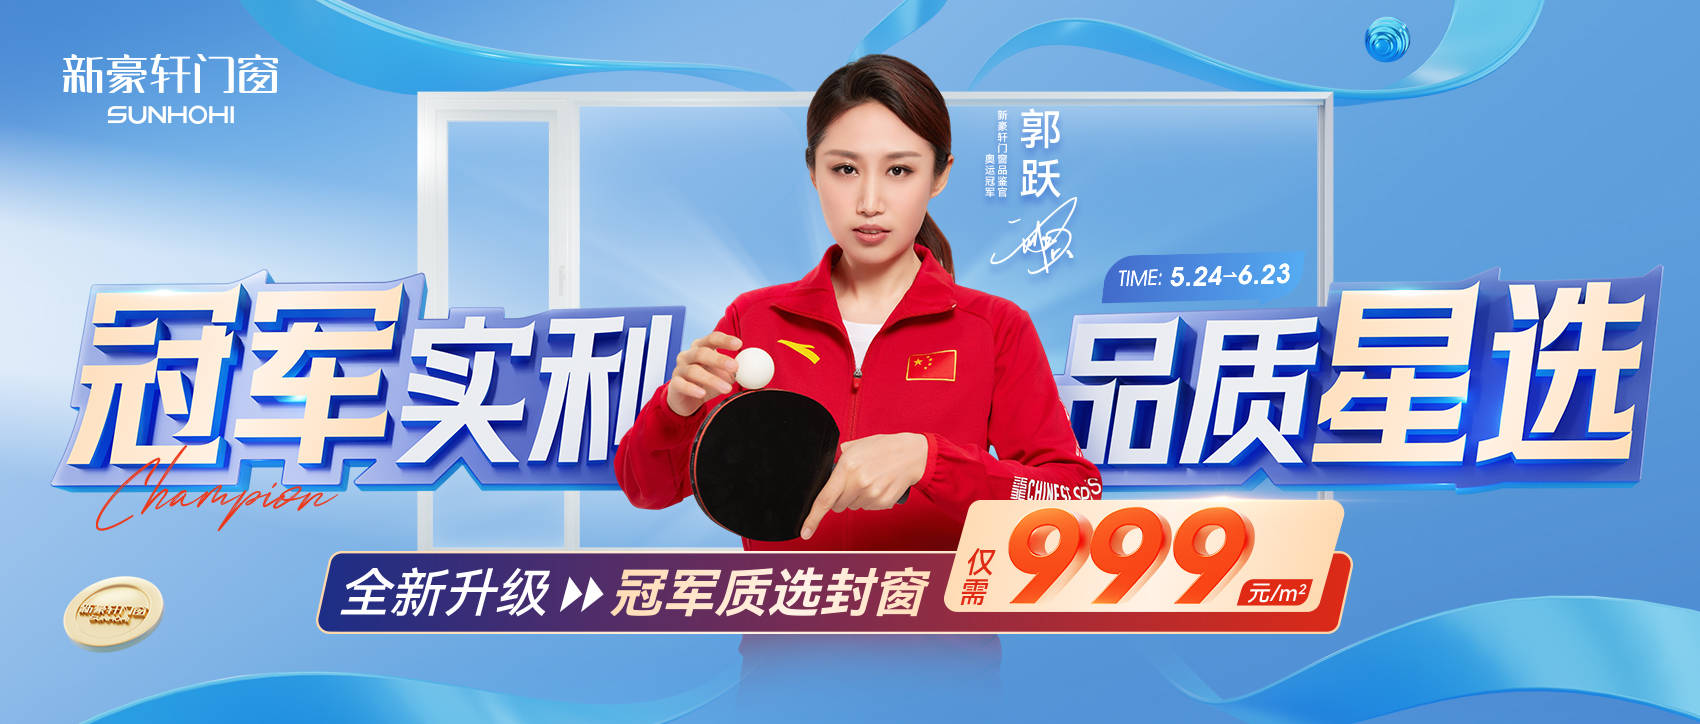  The champion is coming. Xinhao Xuan Doors and Windows will join hands with Guo Yue, the world table tennis champion, to create a wave of quality and home building with real "benefits"